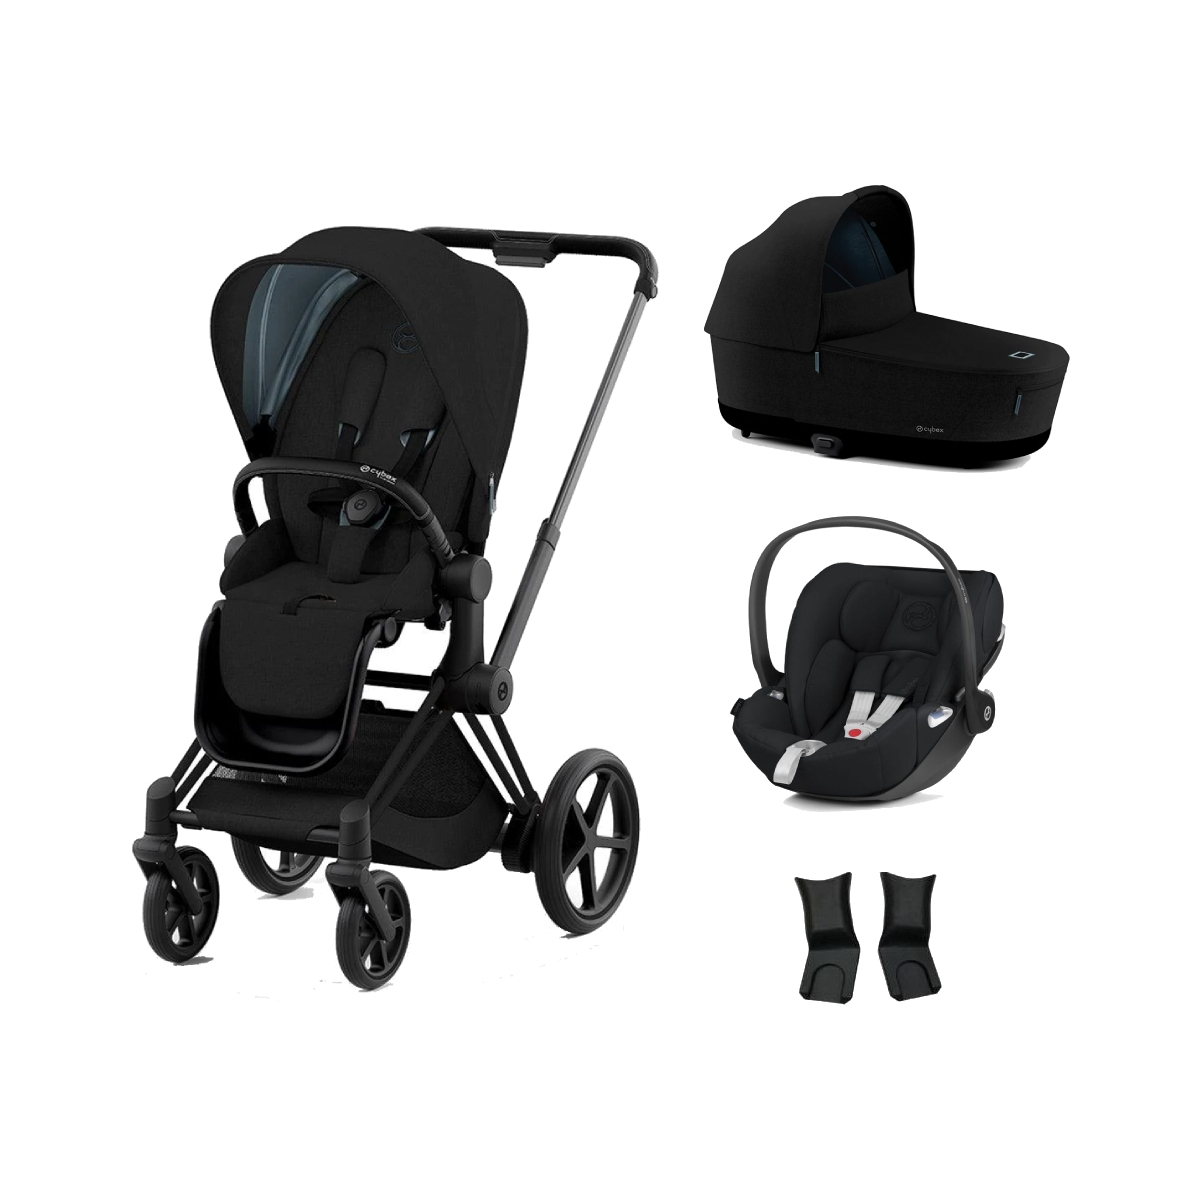 Cybex e-Priam Black Pushchair with Lux Carry Cot & Cloud Z Car Seat